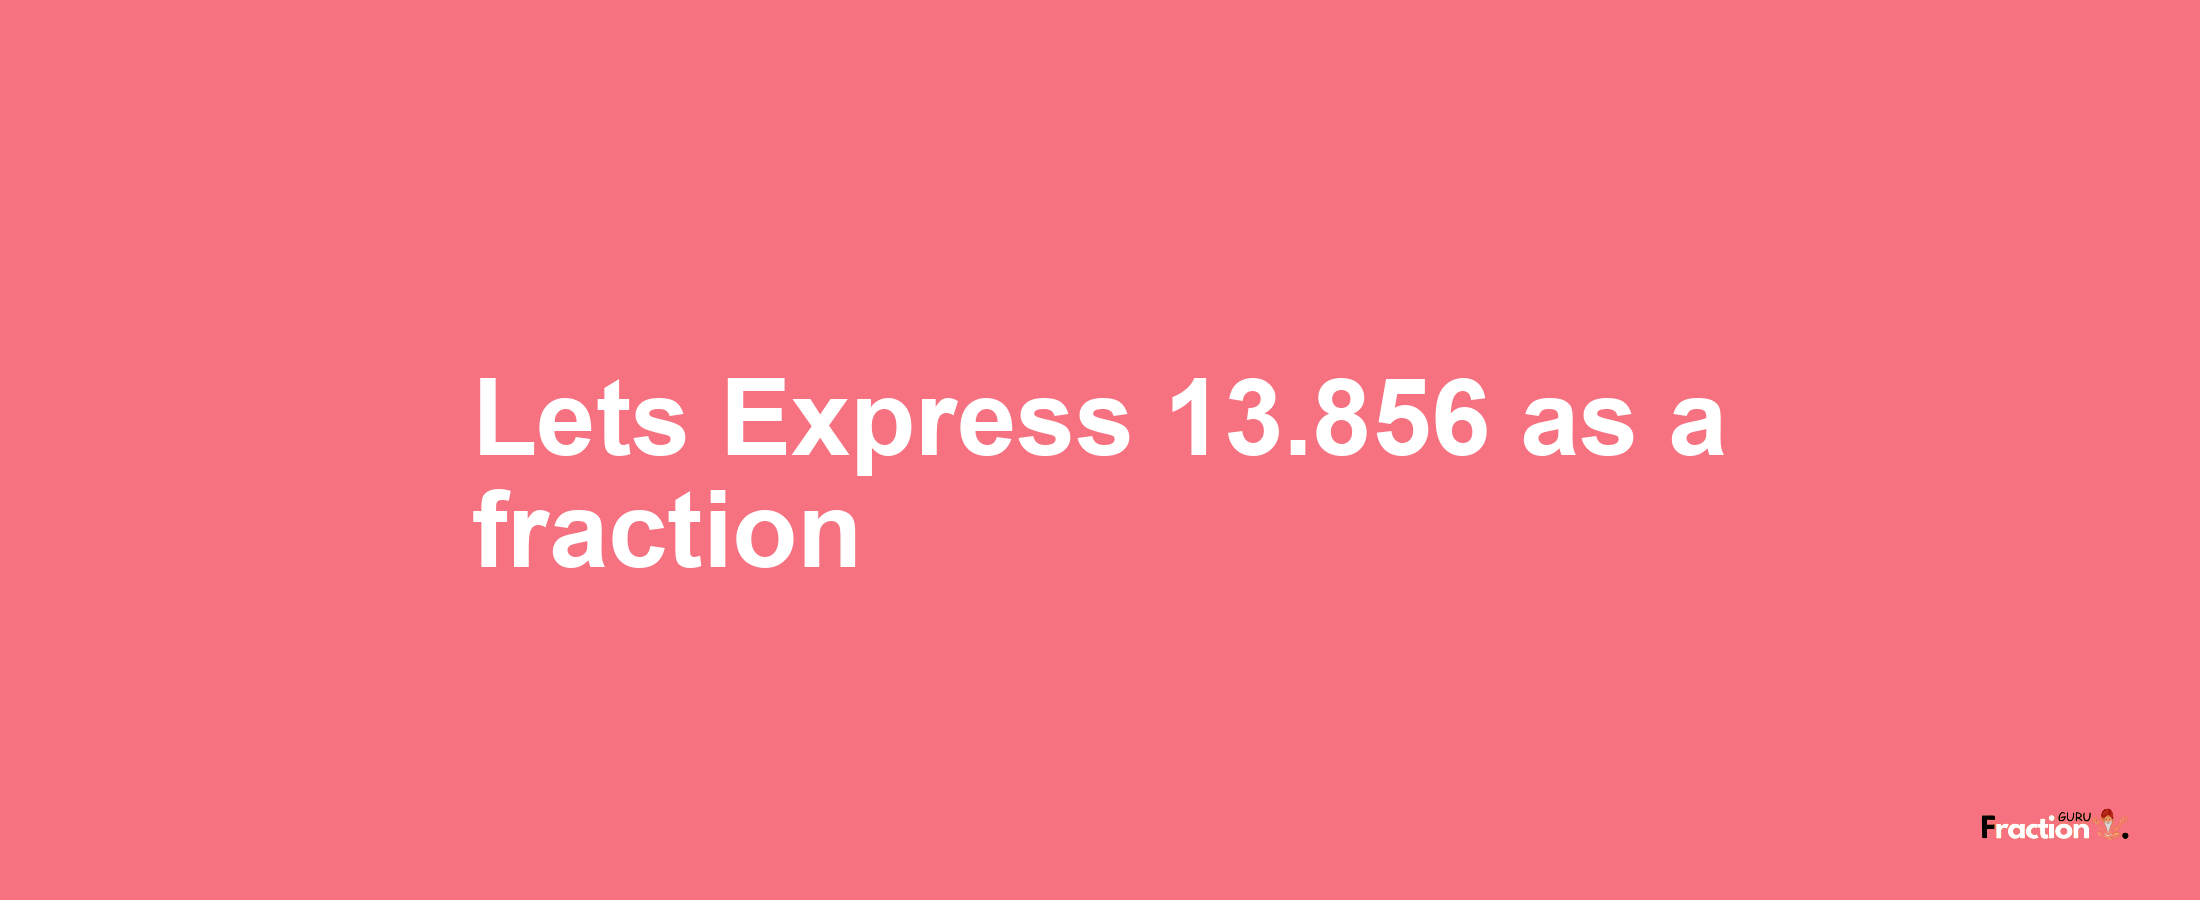 Lets Express 13.856 as afraction